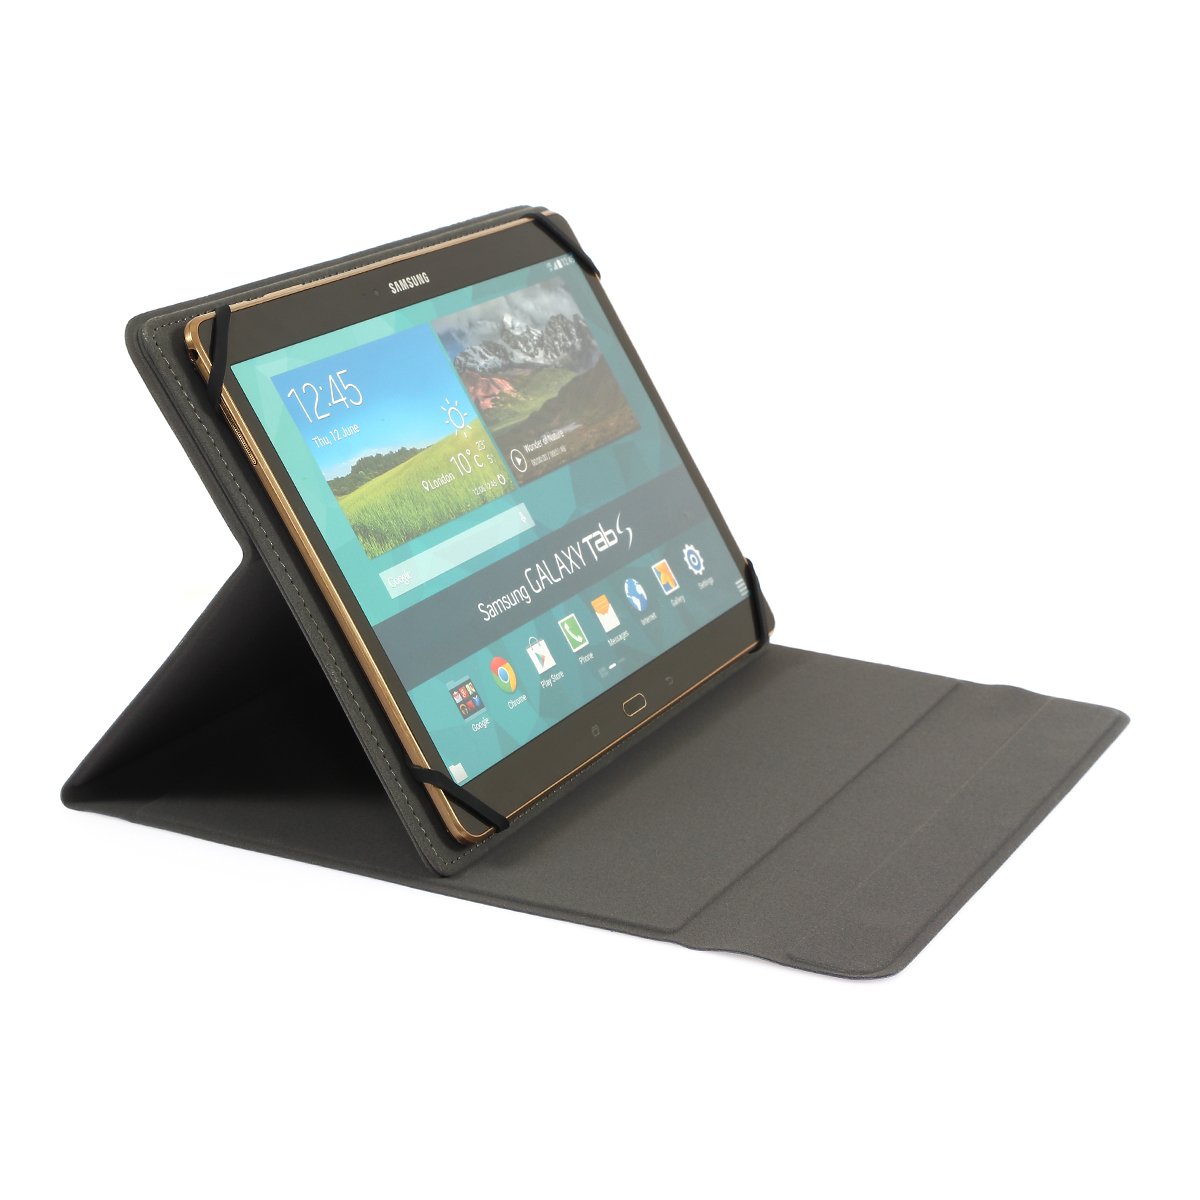 Besmall ultra-thin Bluetooth 3.0 keyboard with touchpad removable for Samsung Galaxy Tab Pro 10.1 tablet